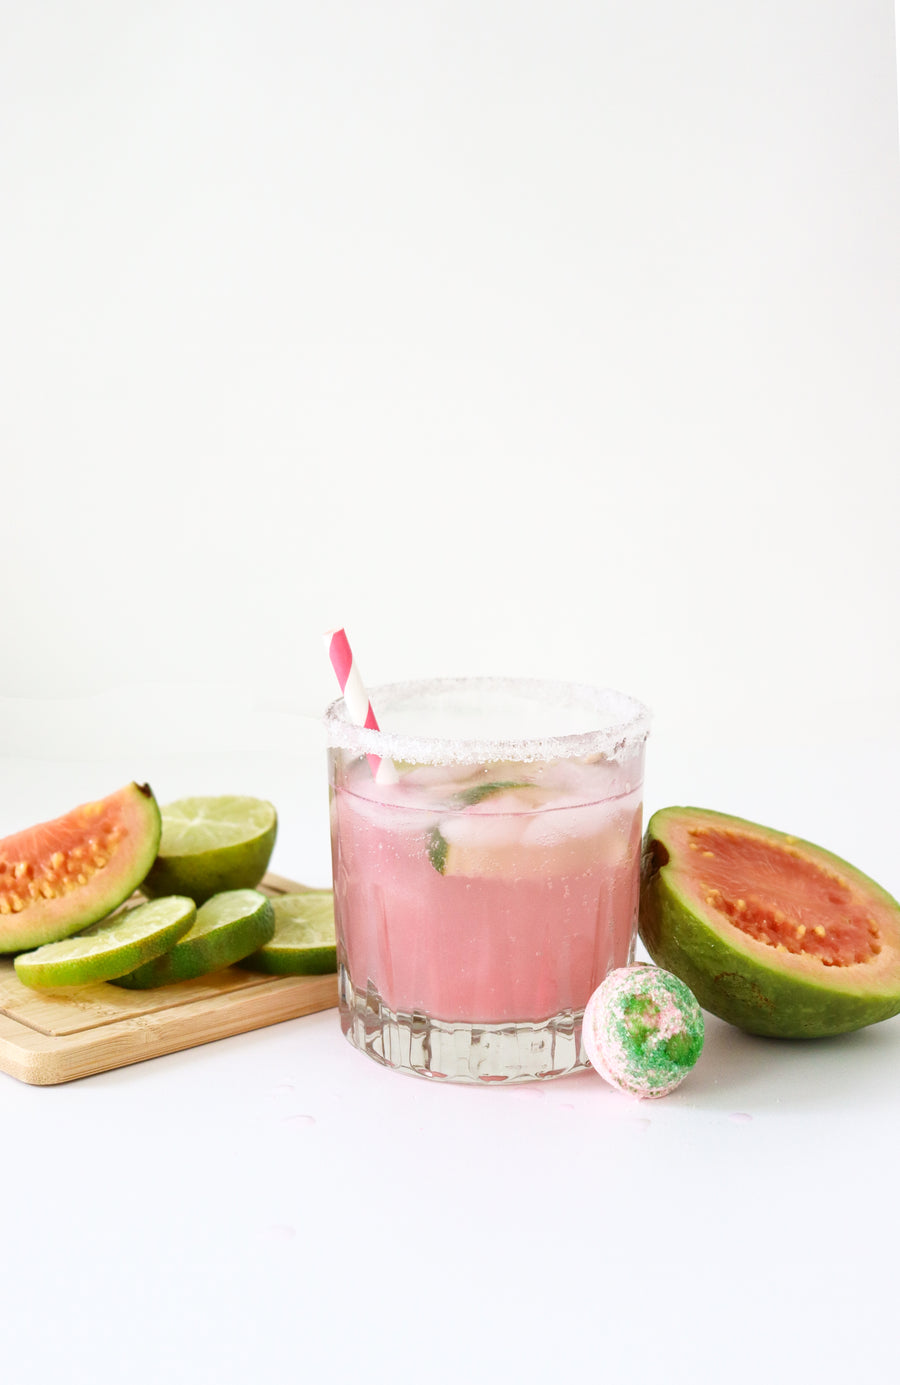 GUAVA LIME COCKTAIL BOMB